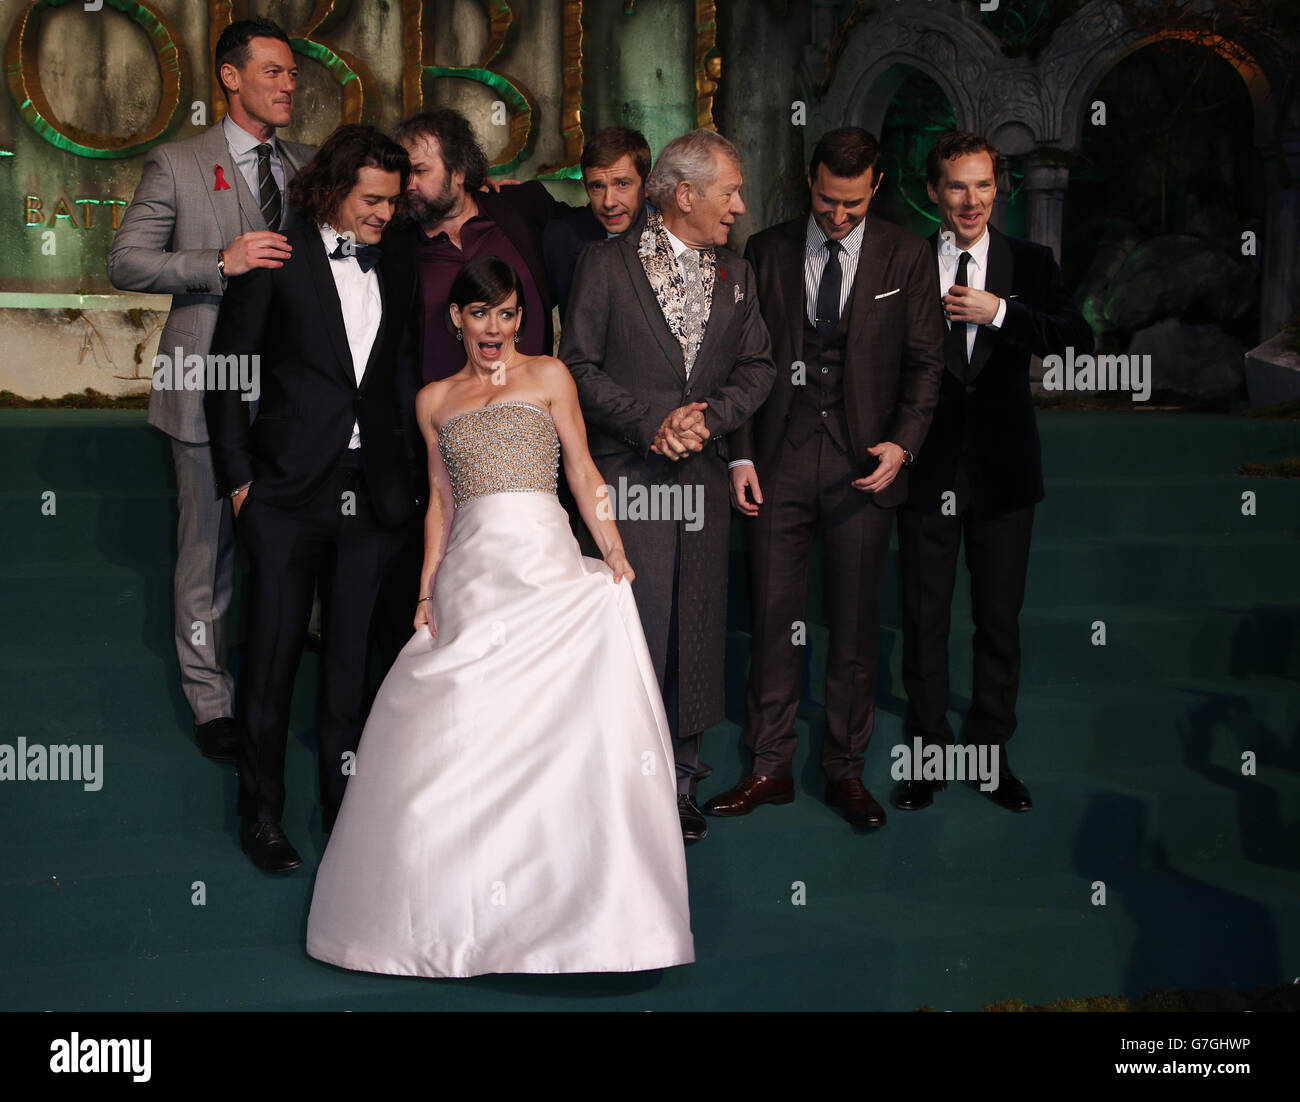 Cast members, (left - right) Luke Evans, Orlando Bloom, director Peter Jackson, Evangeline Lilly, Martin Freeman, Ian McKellen, Richard Armitage, and Benedict Cumberbatch on the green carpet for the premiere of The Hobbit: Battle of the Five Armies, at the Odeon Leicester Square in central London. Stock Photo